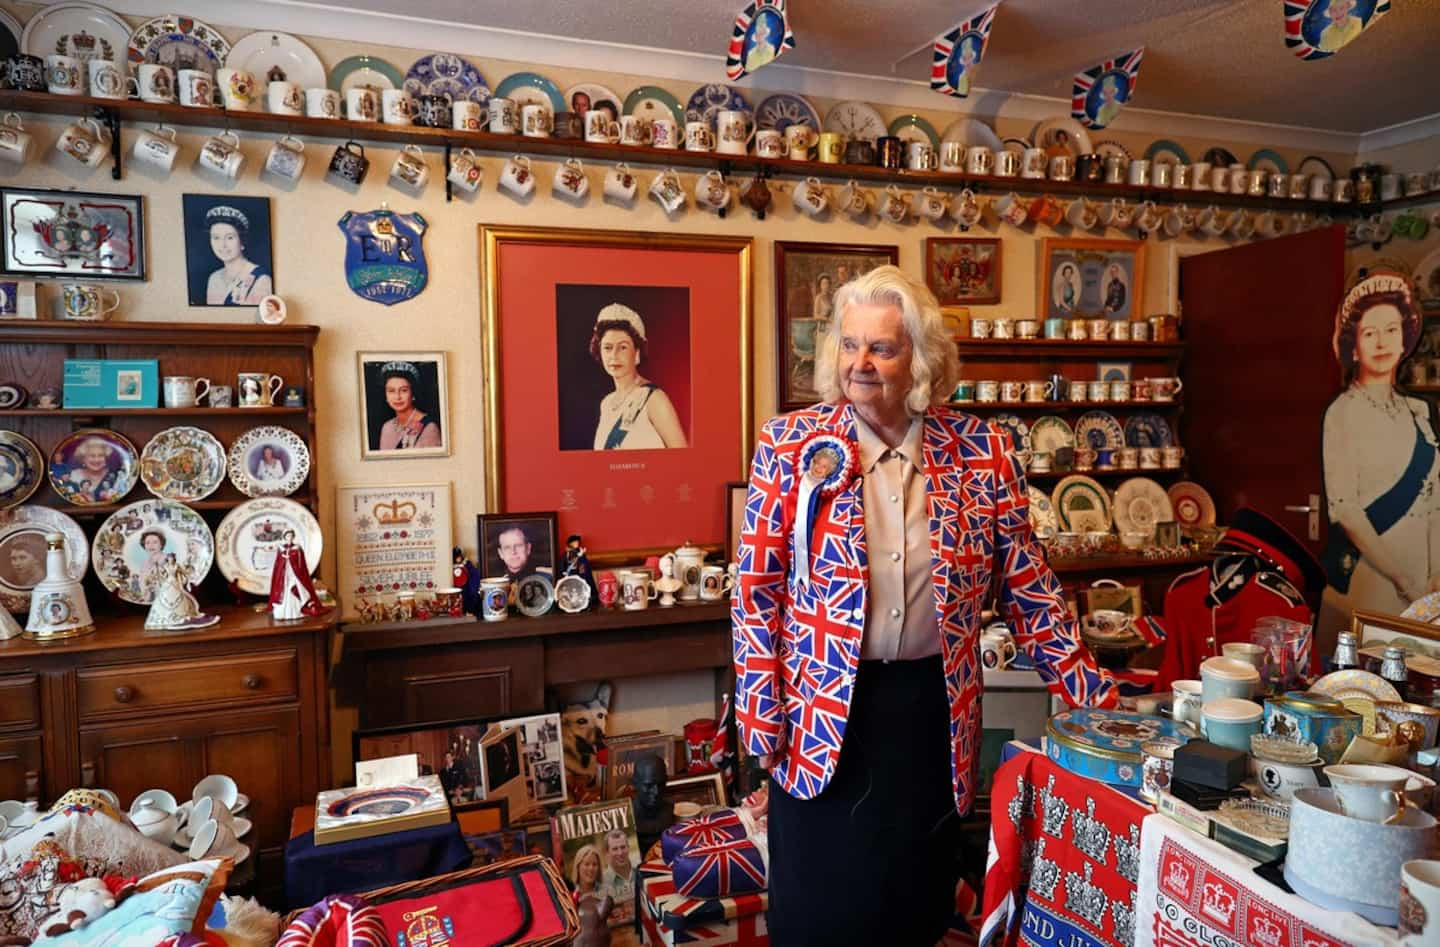 [PHOTOS] See the fascinating home of a 'finished fan' of the royal family